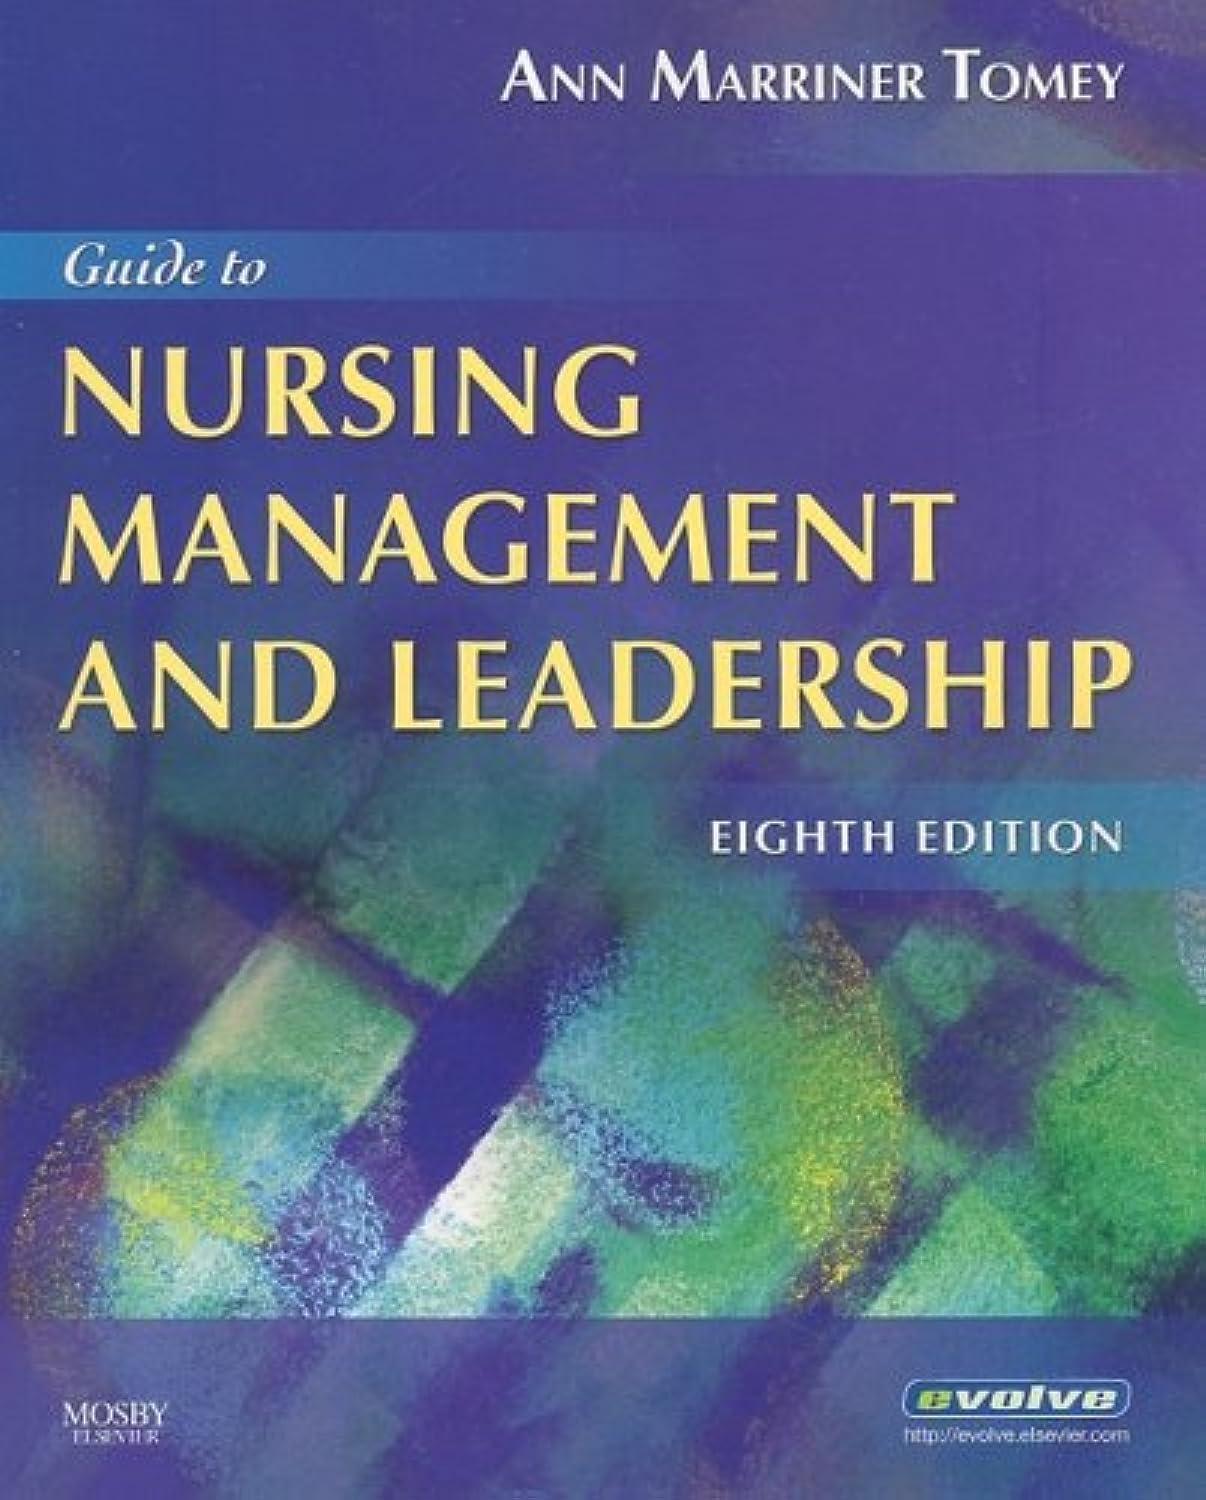 guide to nursing management and leadership 8th edition ann marriner tomey 032305238x, 9780323052382